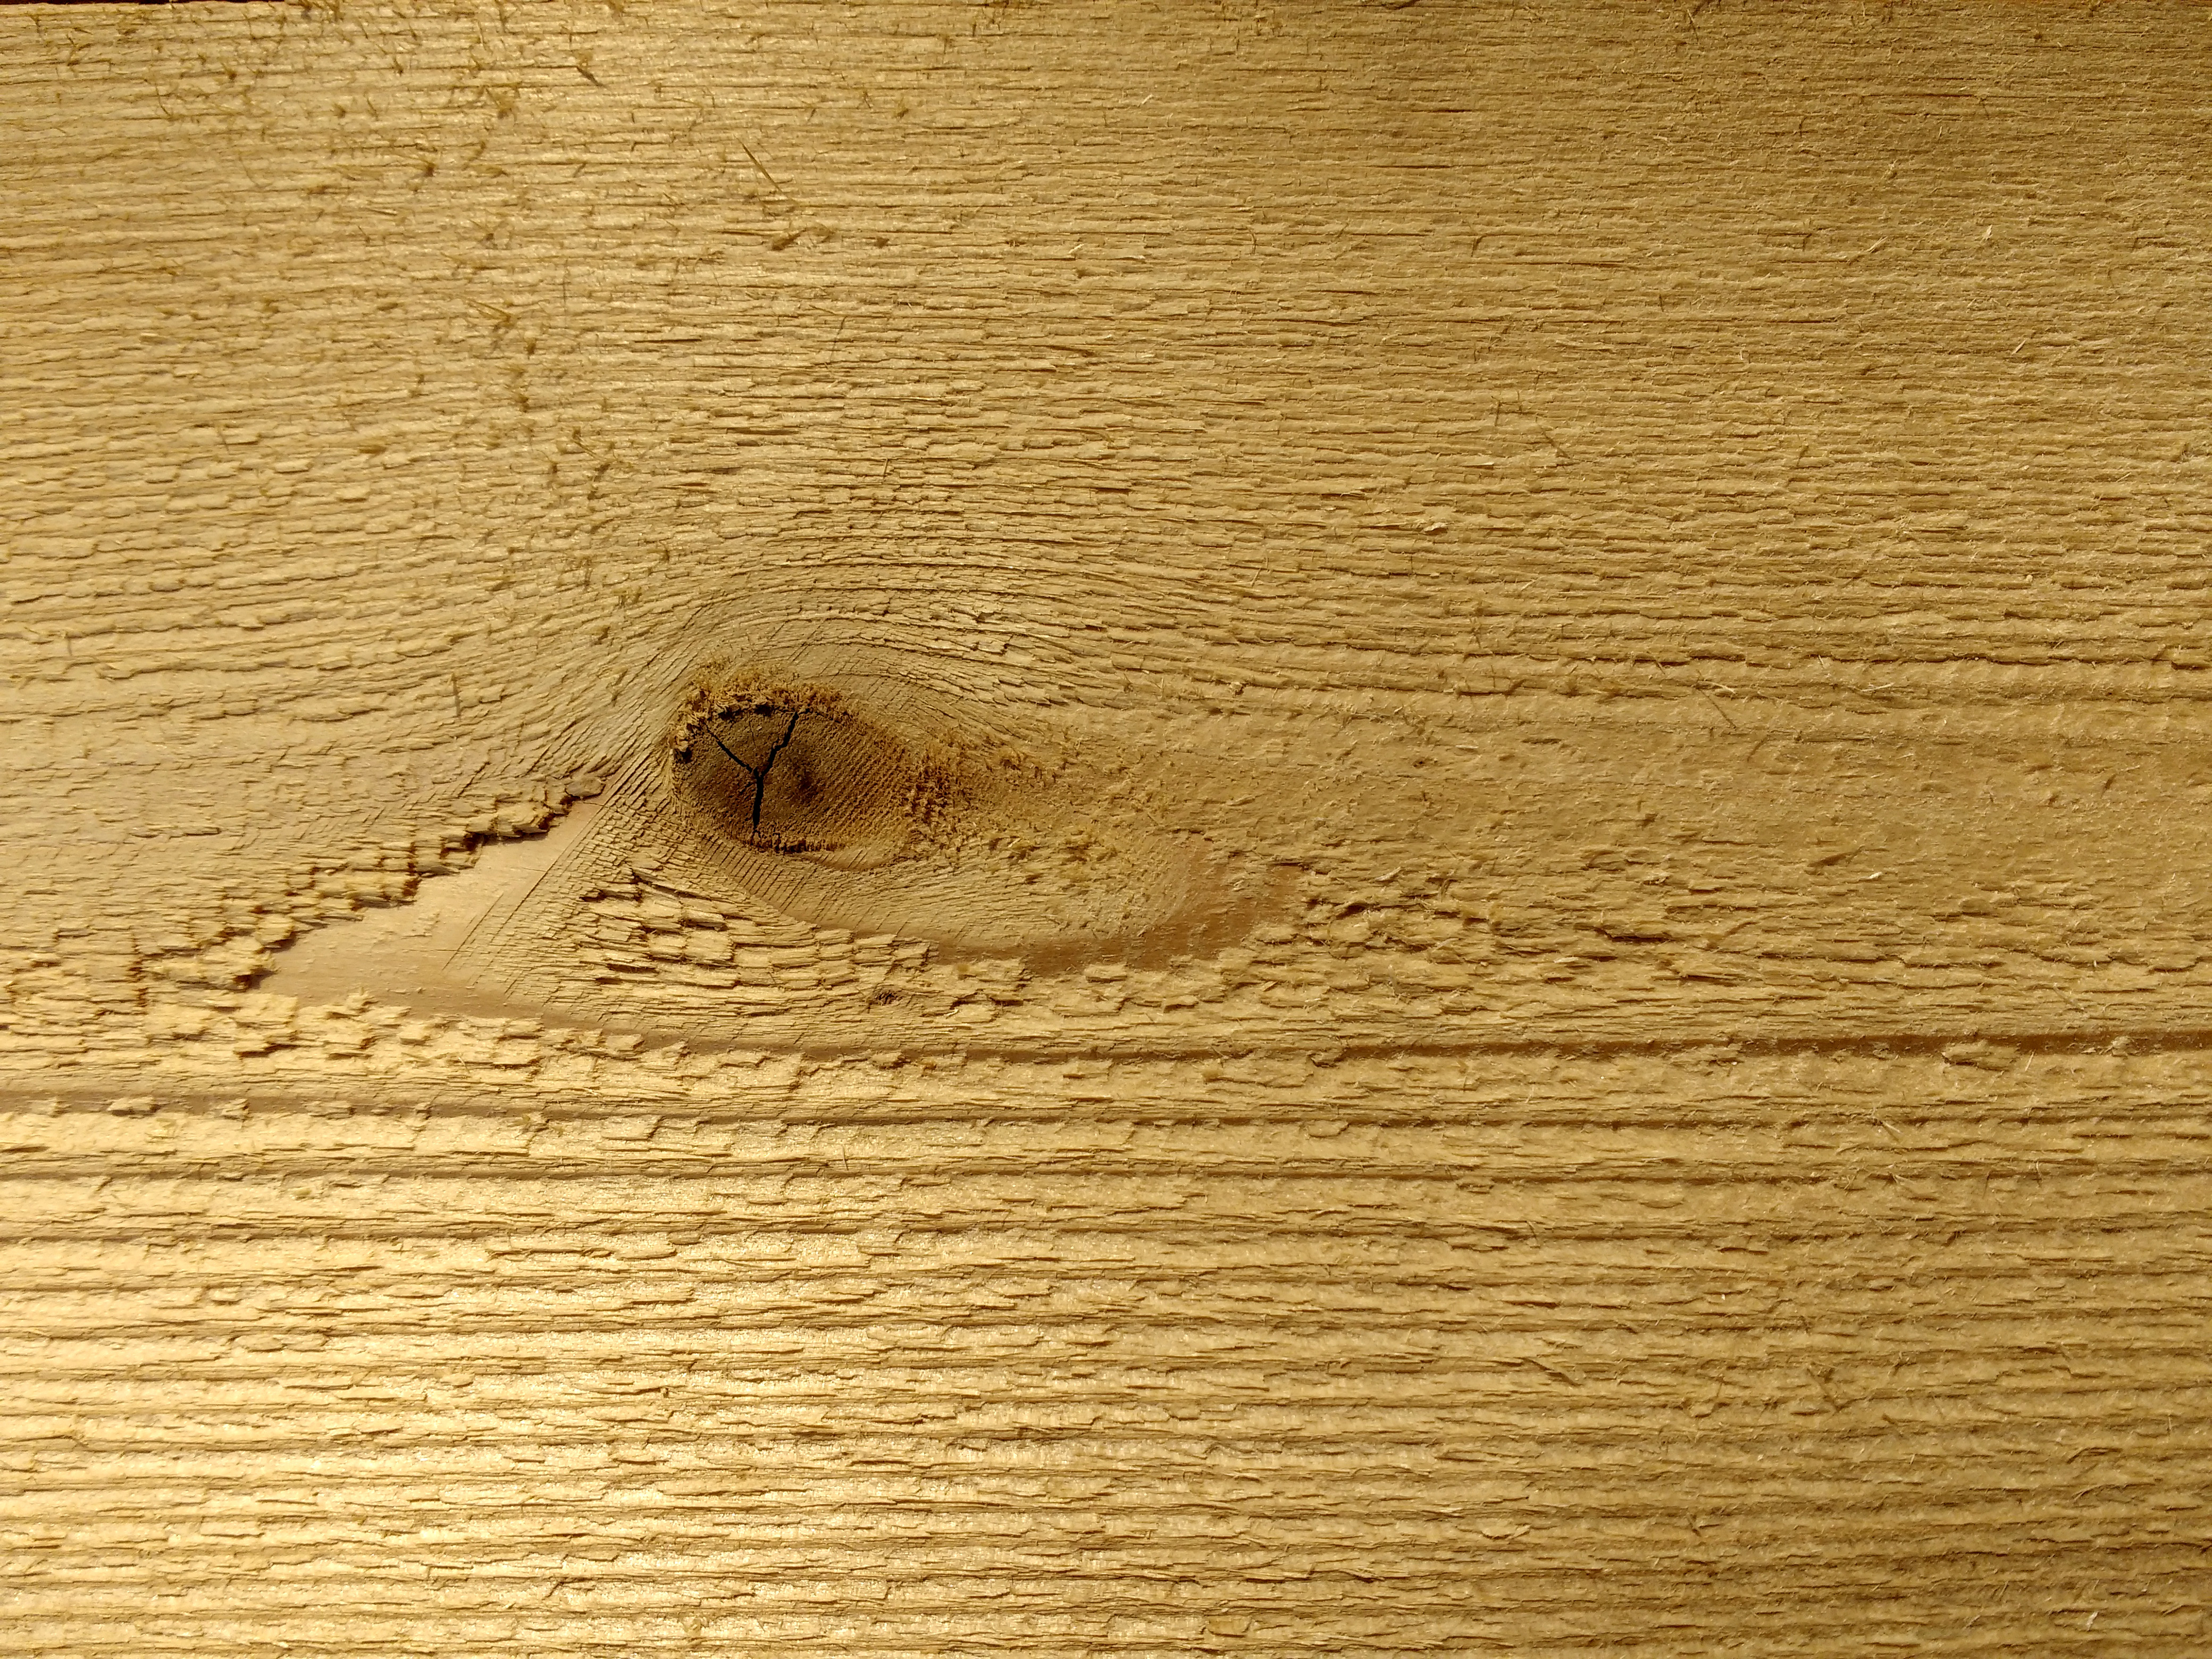 Knot in Wood Texture Picture.